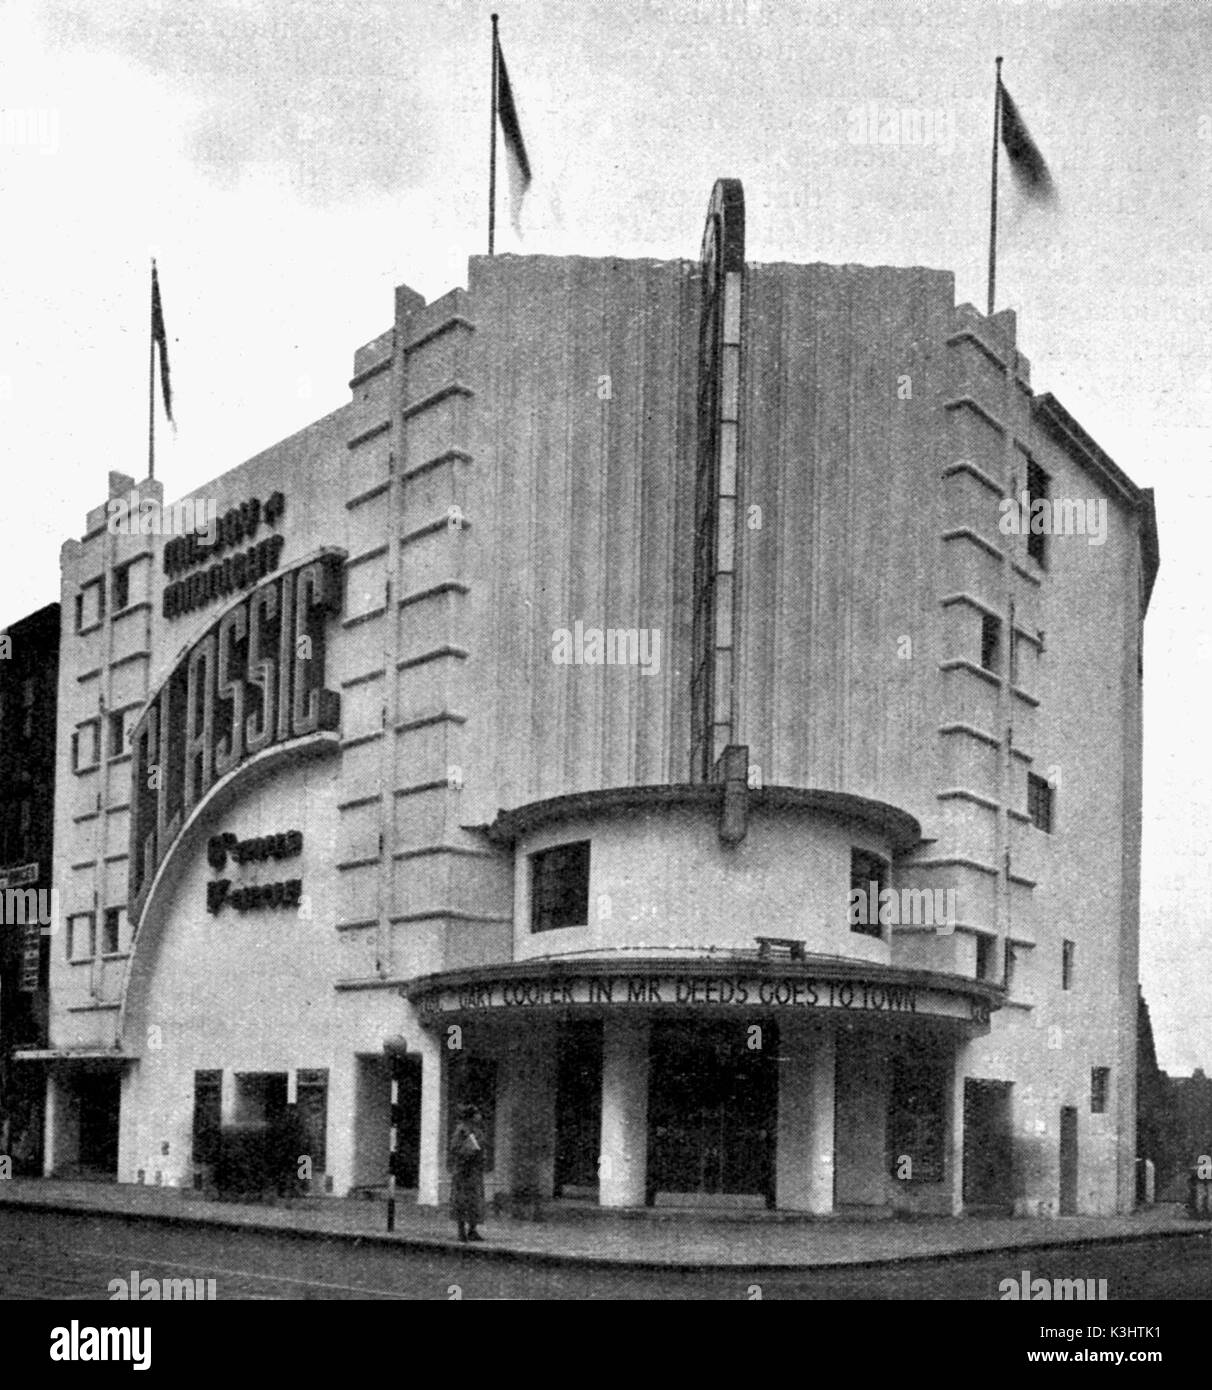 CLASSIC CINEMA, DALSTON - pictured in 1938 later known as the RIO CLASSIC CINEMA, DALSTON - pictured in 1938 - later known as the RIO Stock Photo